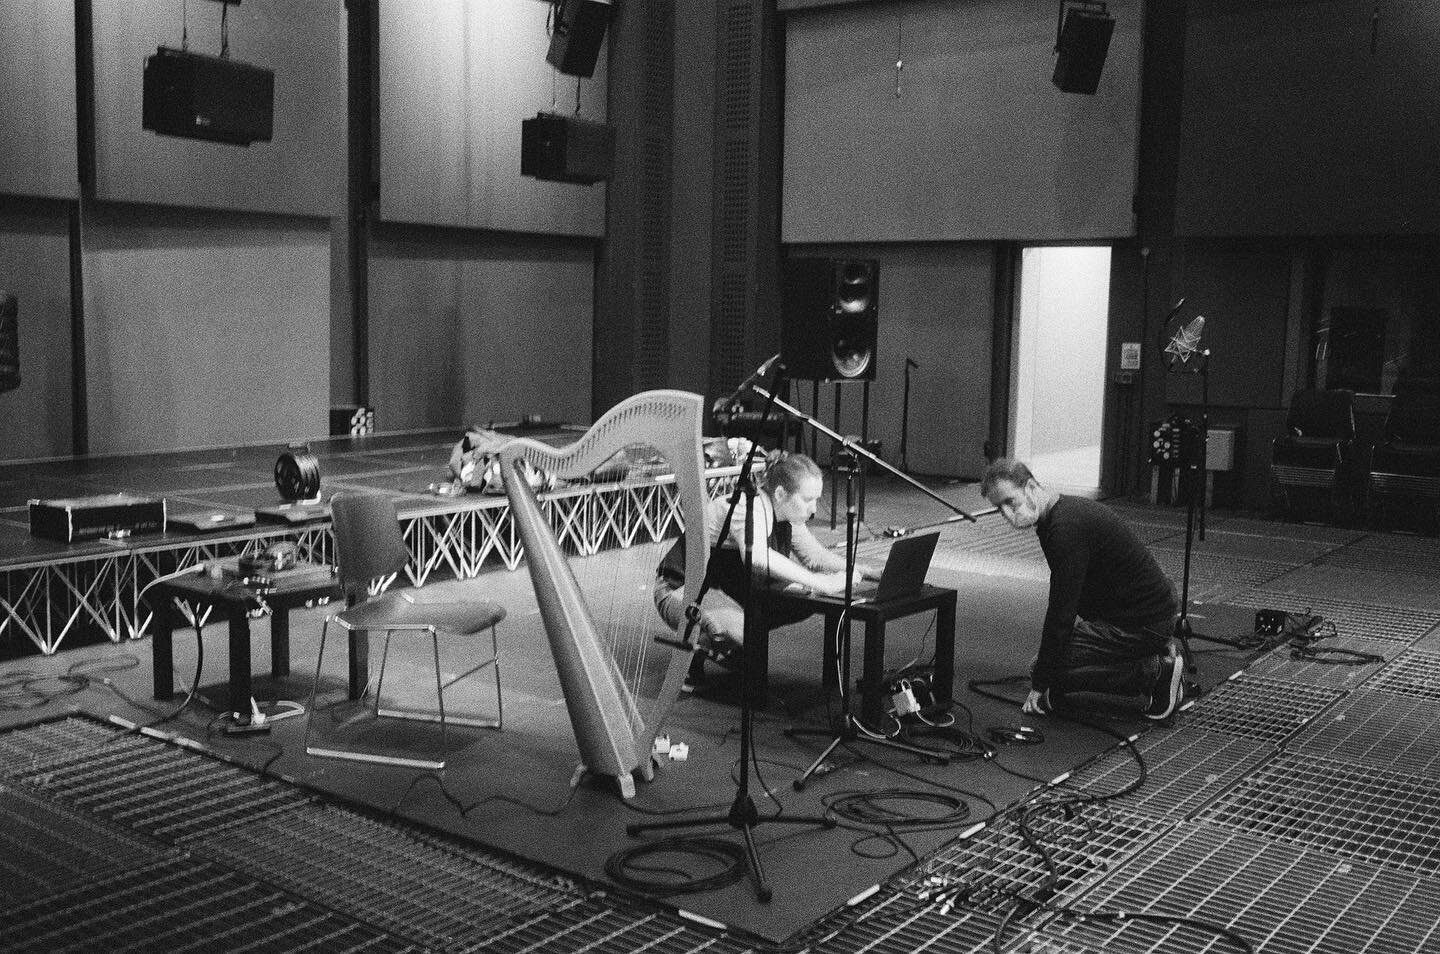 #AONARACHT album is out 22nd January. It combines custom made computer interaction with brilliant traditional musicians. It was an exciting, interesting and technically involved recording process. We navigated unpredictable live electronics, a range 